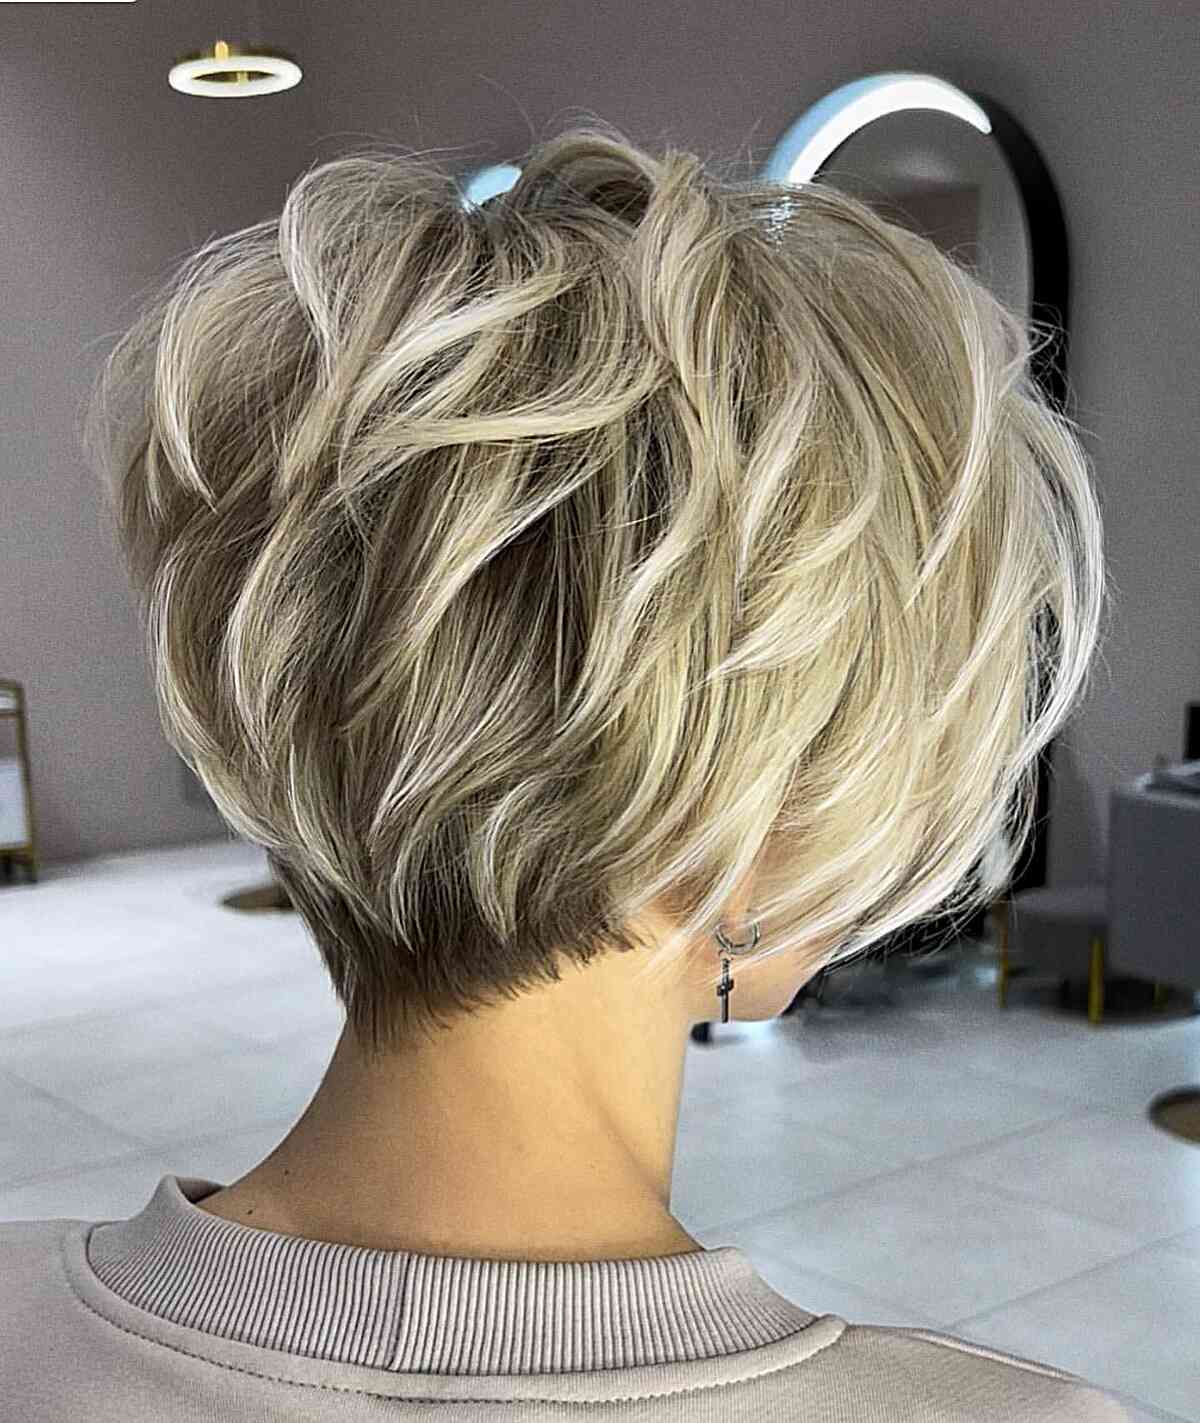 Short Thick Pixie Bob with Visible Layers for women with short blonde hair